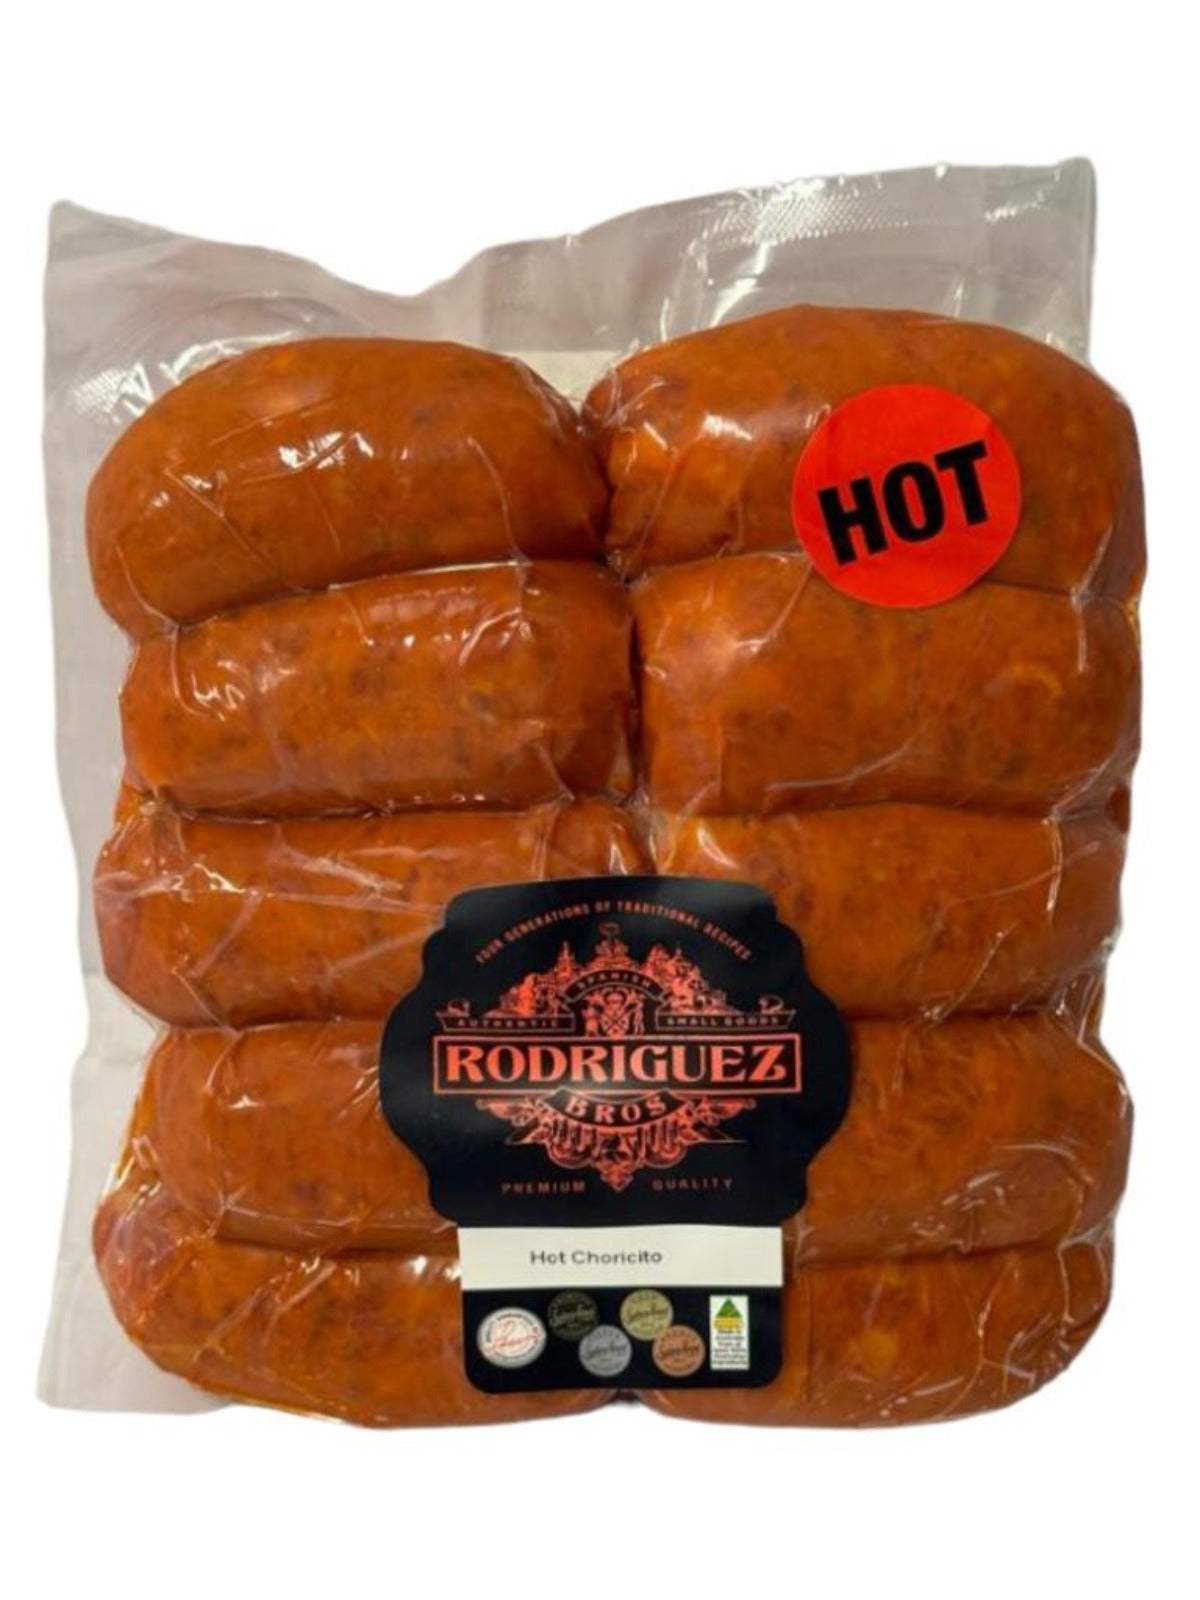 HOT Fresh Spanish Chorizito Choricito Mini Chorizo 18 piece pack approx 900g packet. Regular price $16.50. [You are guaranteed to receive at least 855g of product, equivalent price of $19.30 per kg.]